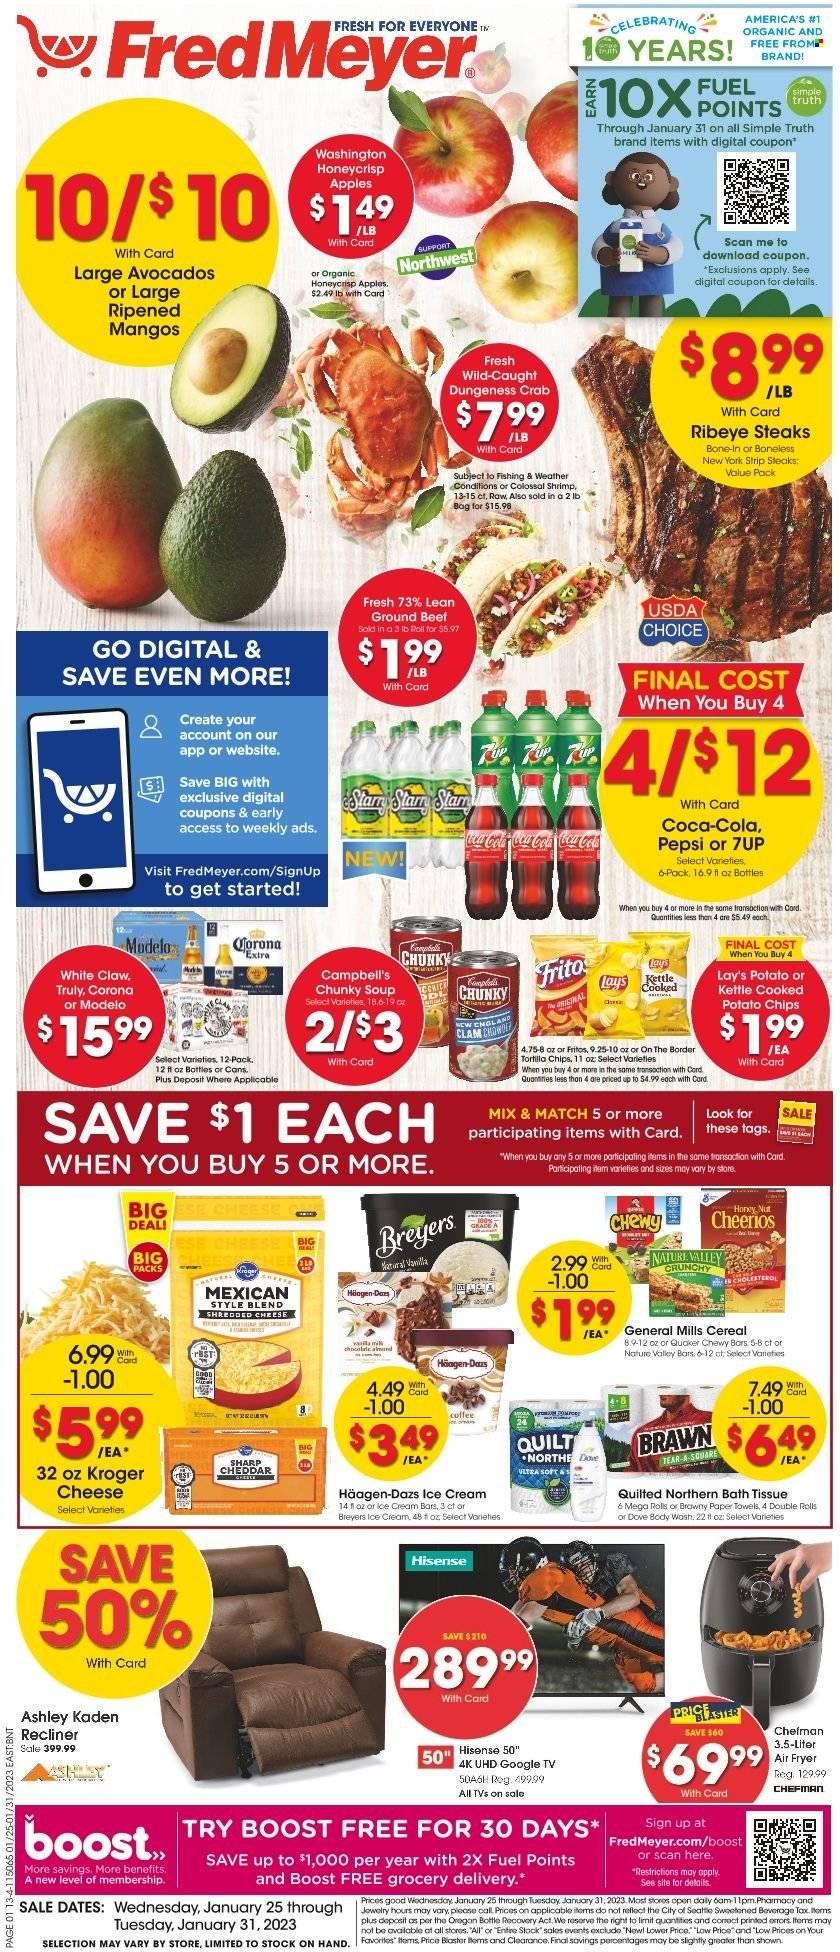 thumbnail - Fred Meyer Flyer - 01/25/2023 - 01/31/2023 - Sales products - apples, avocado, clams, crab, shrimps, Campbell's, soup, Quaker, shredded cheese, ice cream, ice cream bars, Häagen-Dazs, Dove, Fritos, tortilla chips, potato chips, chips, Lay’s, cereals, Cheerios, Nature Valley, Coca-Cola, Pepsi, 7UP, Boost, White Claw, TRULY, beer, Corona Extra, Modelo, beef meat, ground beef, steak, ribeye steak, striploin steak, bath tissue, Quilted Northern, kitchen towels, paper towels, body wash, quilt, Hisense, TV, Chefman, air fryer, recliner chair, jewelry. Page 1.